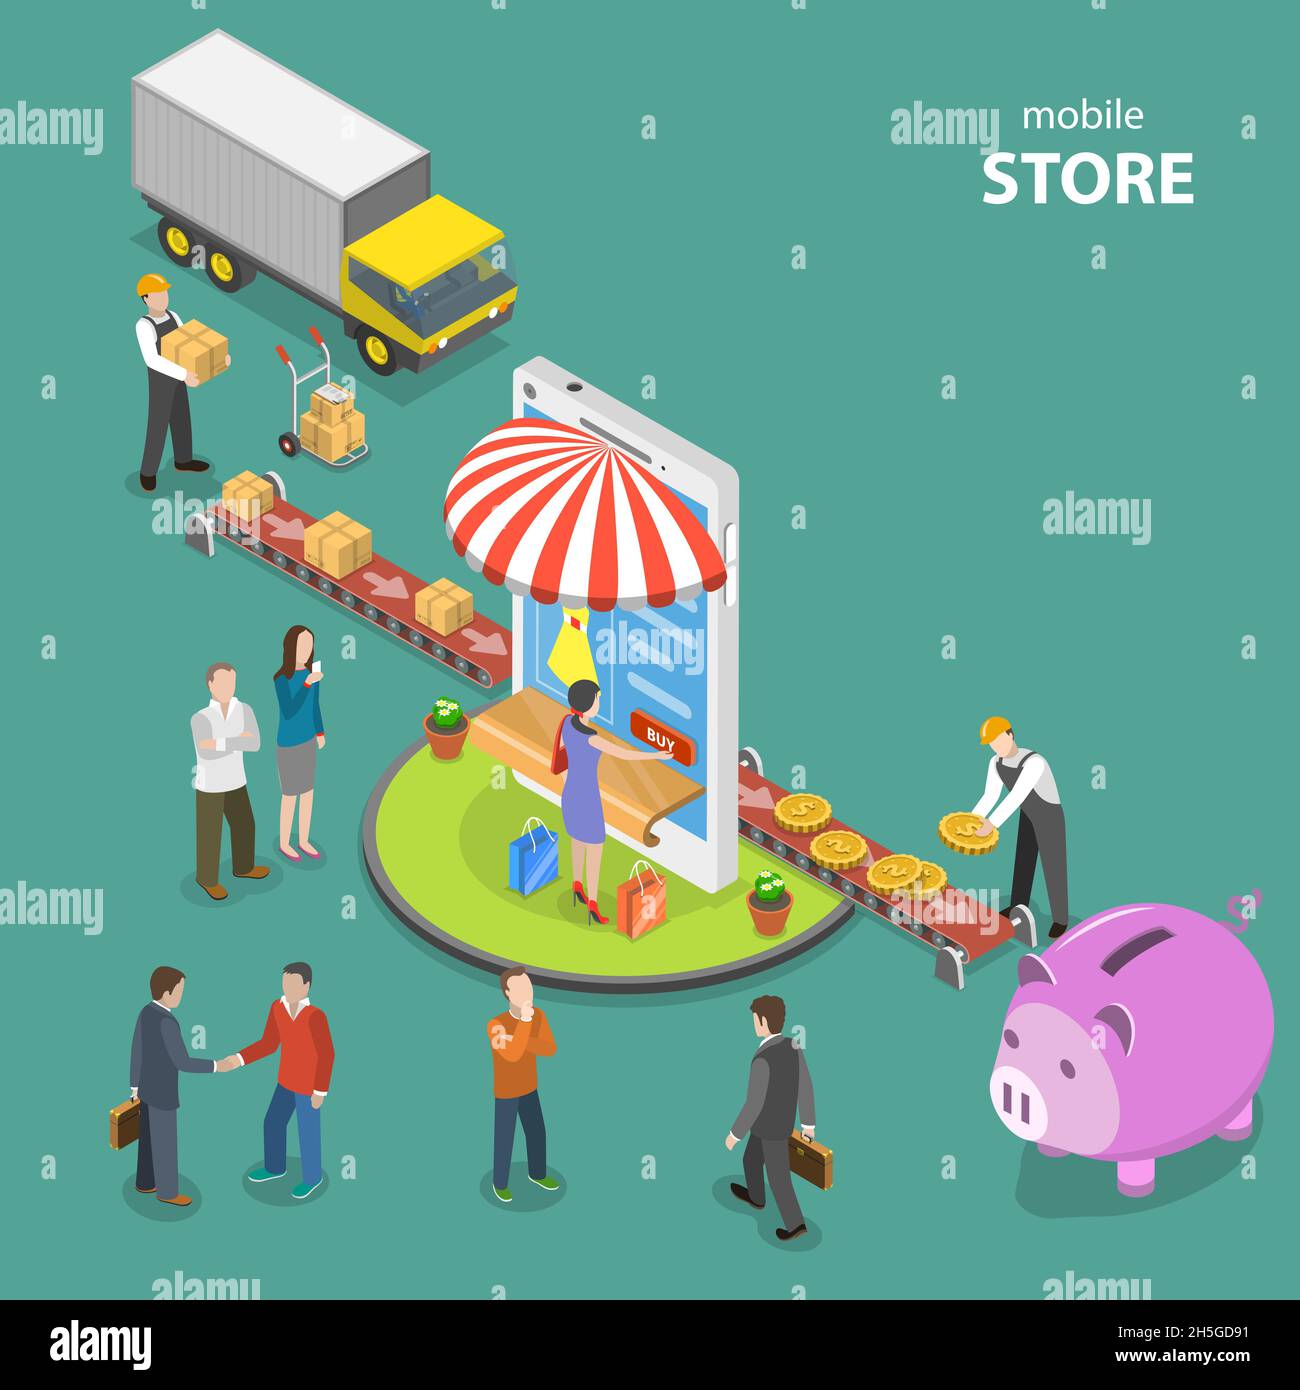 Mobile store flat isometric low poly vector concept. Stock Vector